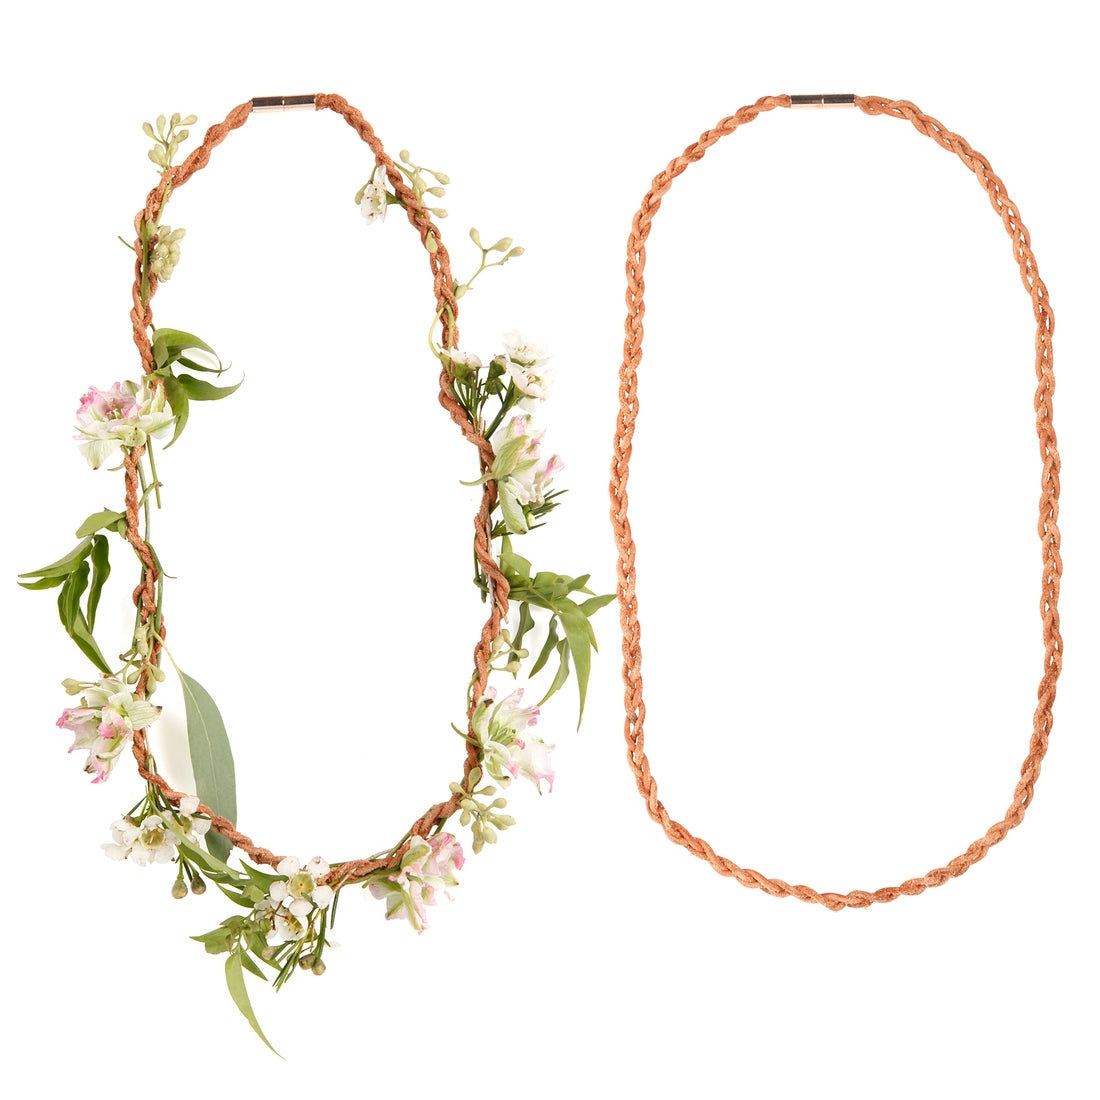 Make Your Own Fresh Flower Necklace